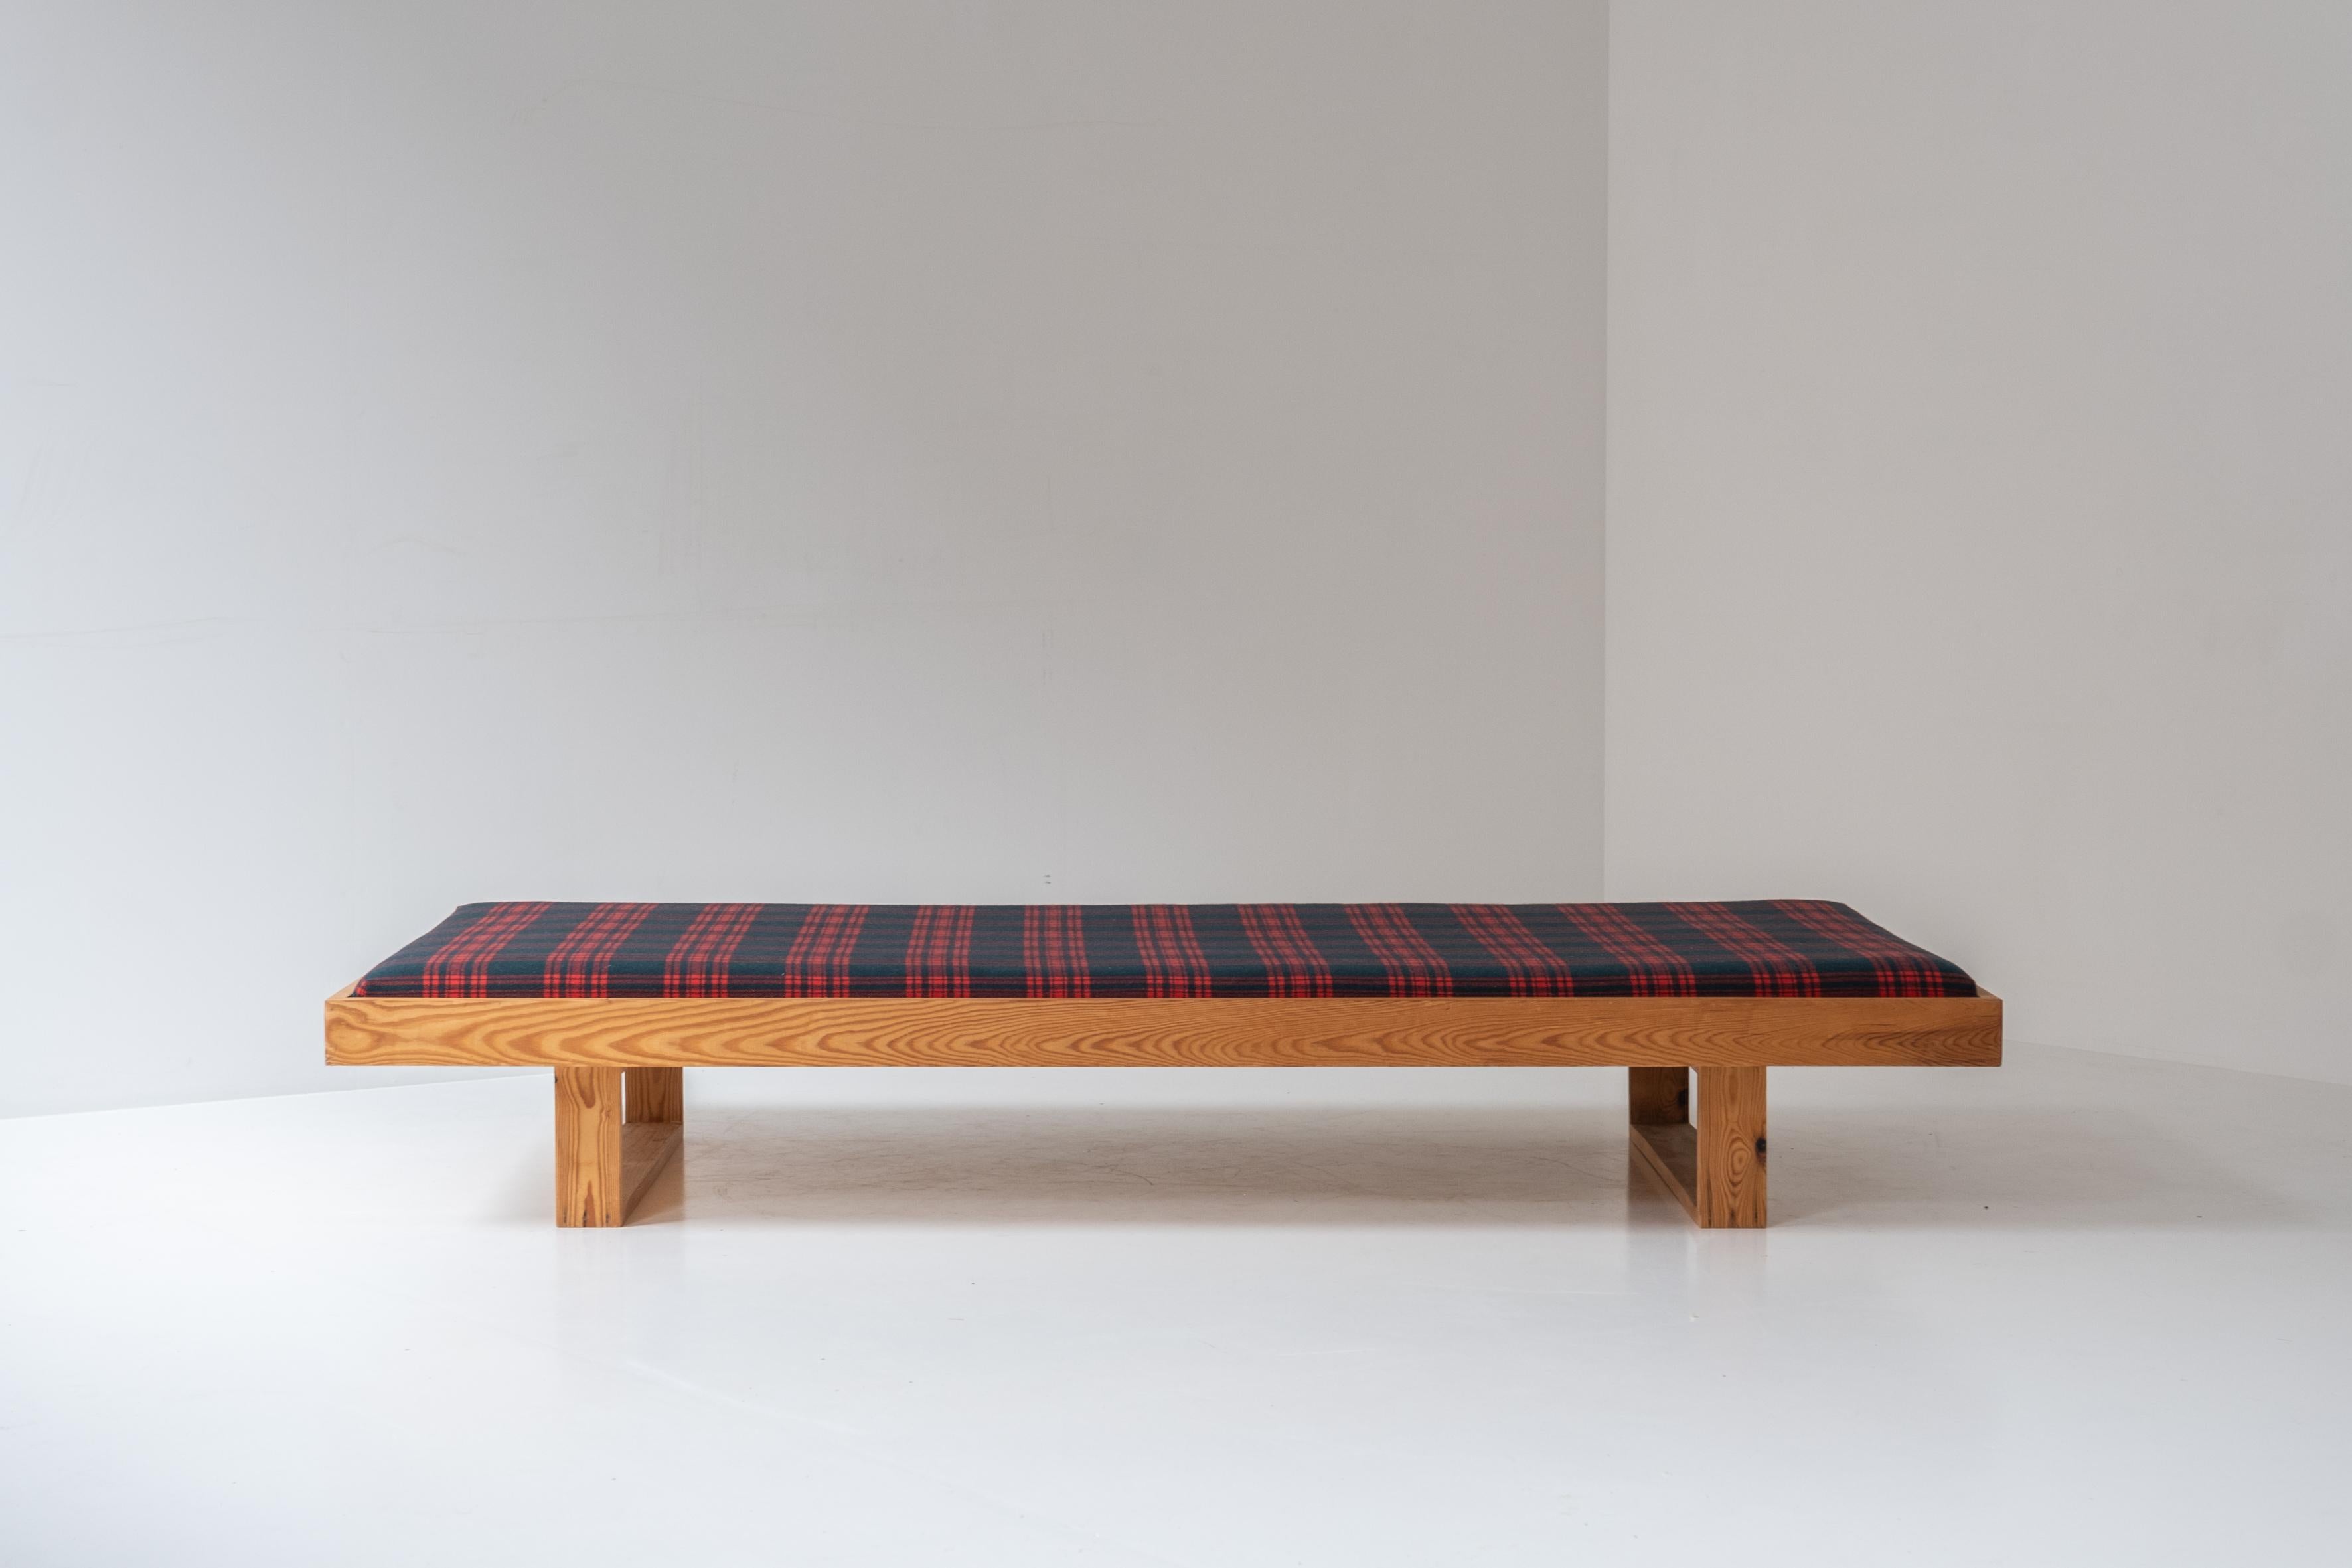 Lovely daybed in pine from Denmark, dating from the 1960s. This piece features a pine frame with freshly re-upholsterd seat. Restored with love. In the manner of Charlotte Perriand VS Ate van Apeldoorn.